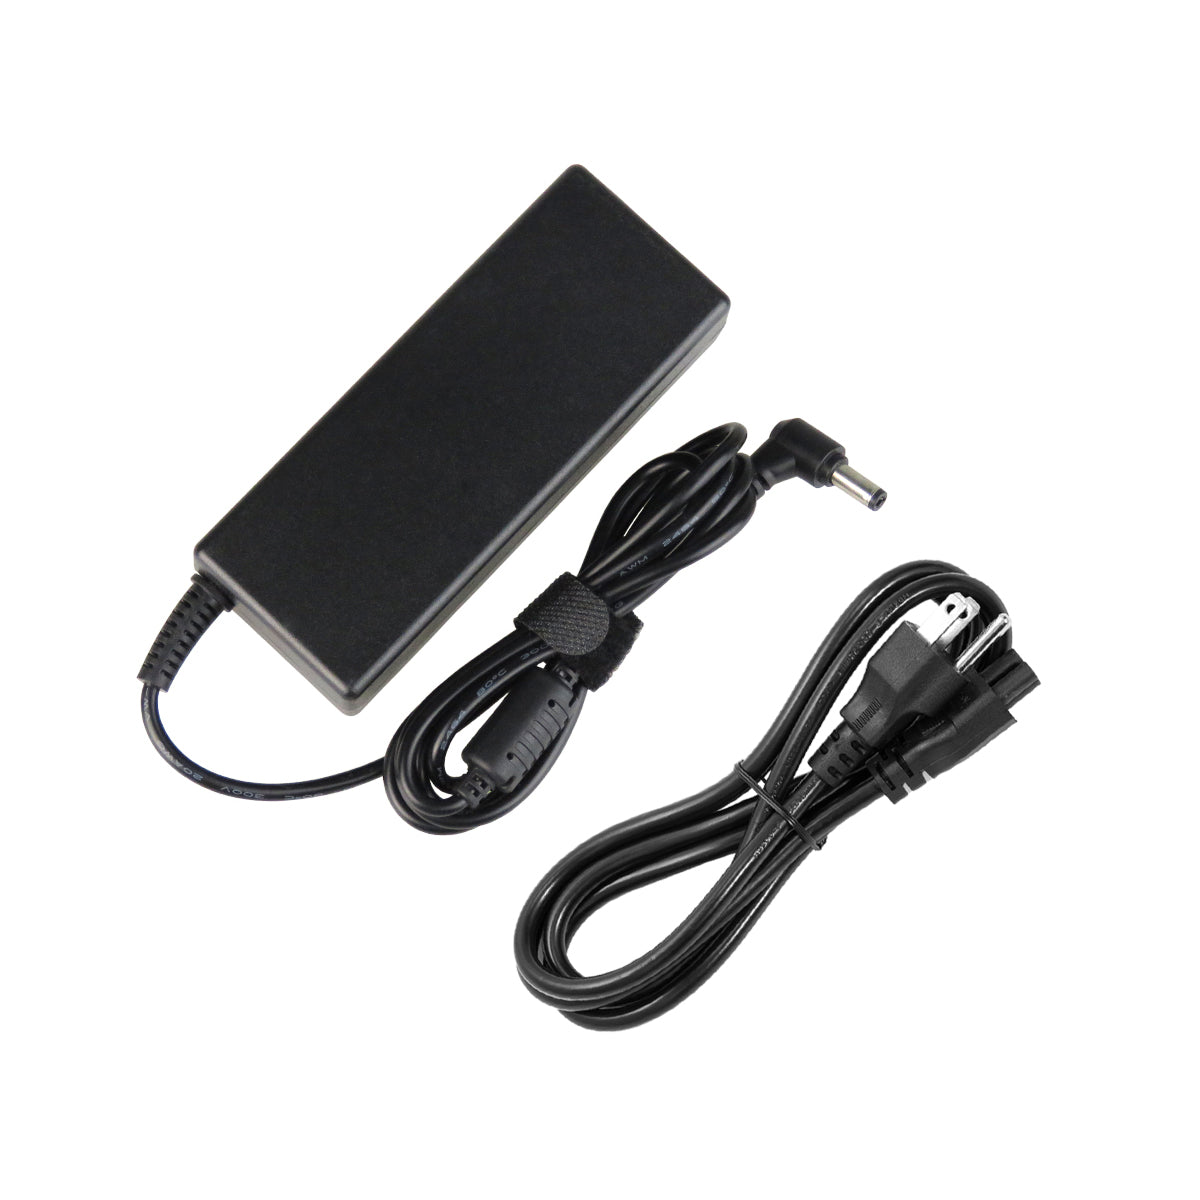 AC Adapter Charger for ASUS N82 Notebook.